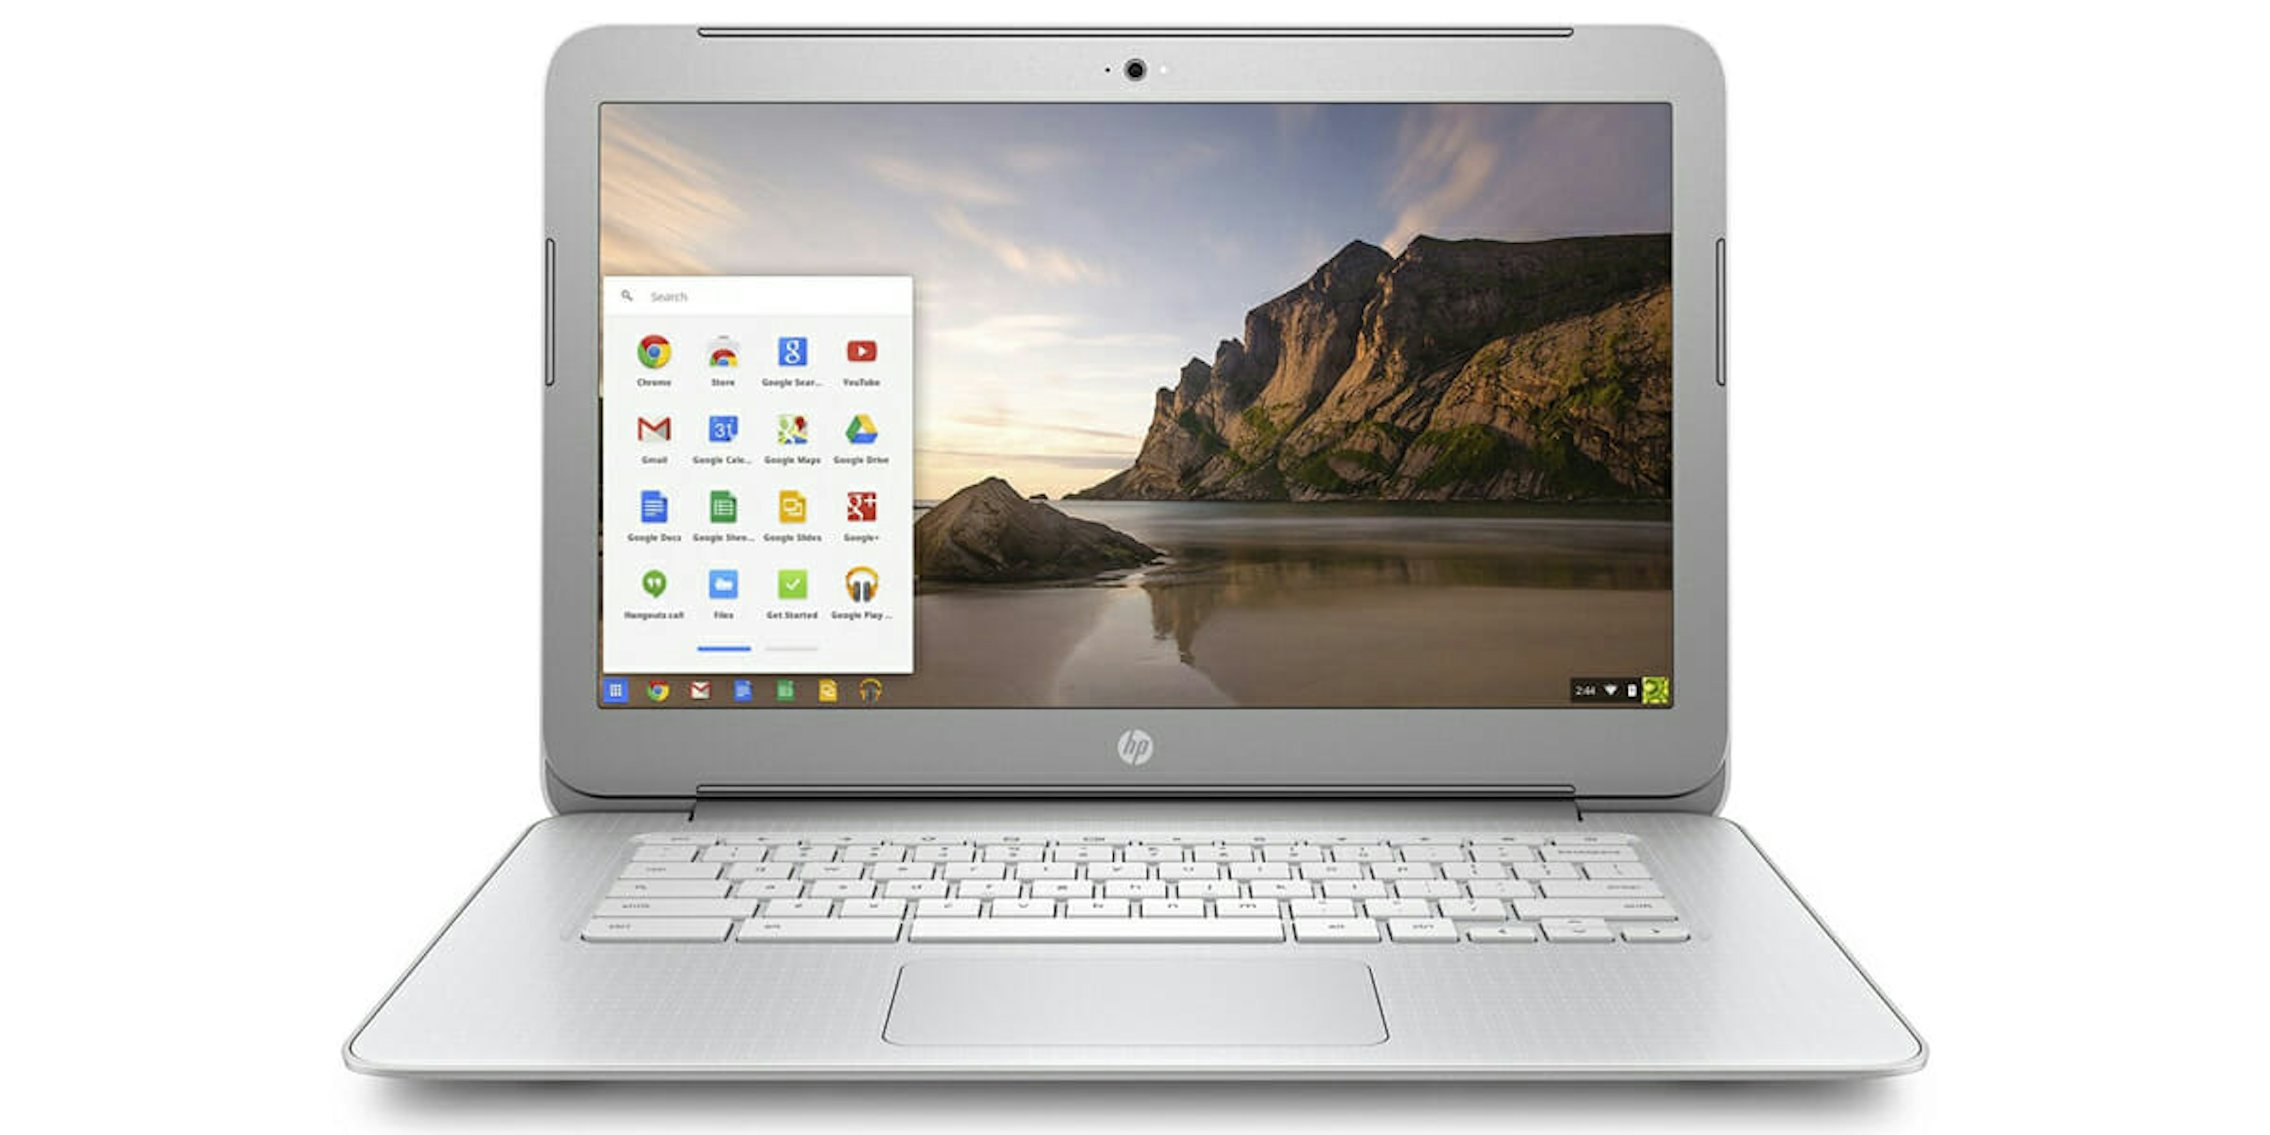 Get an HP Chromebook for just 180 on Black Friday The Daily Dot